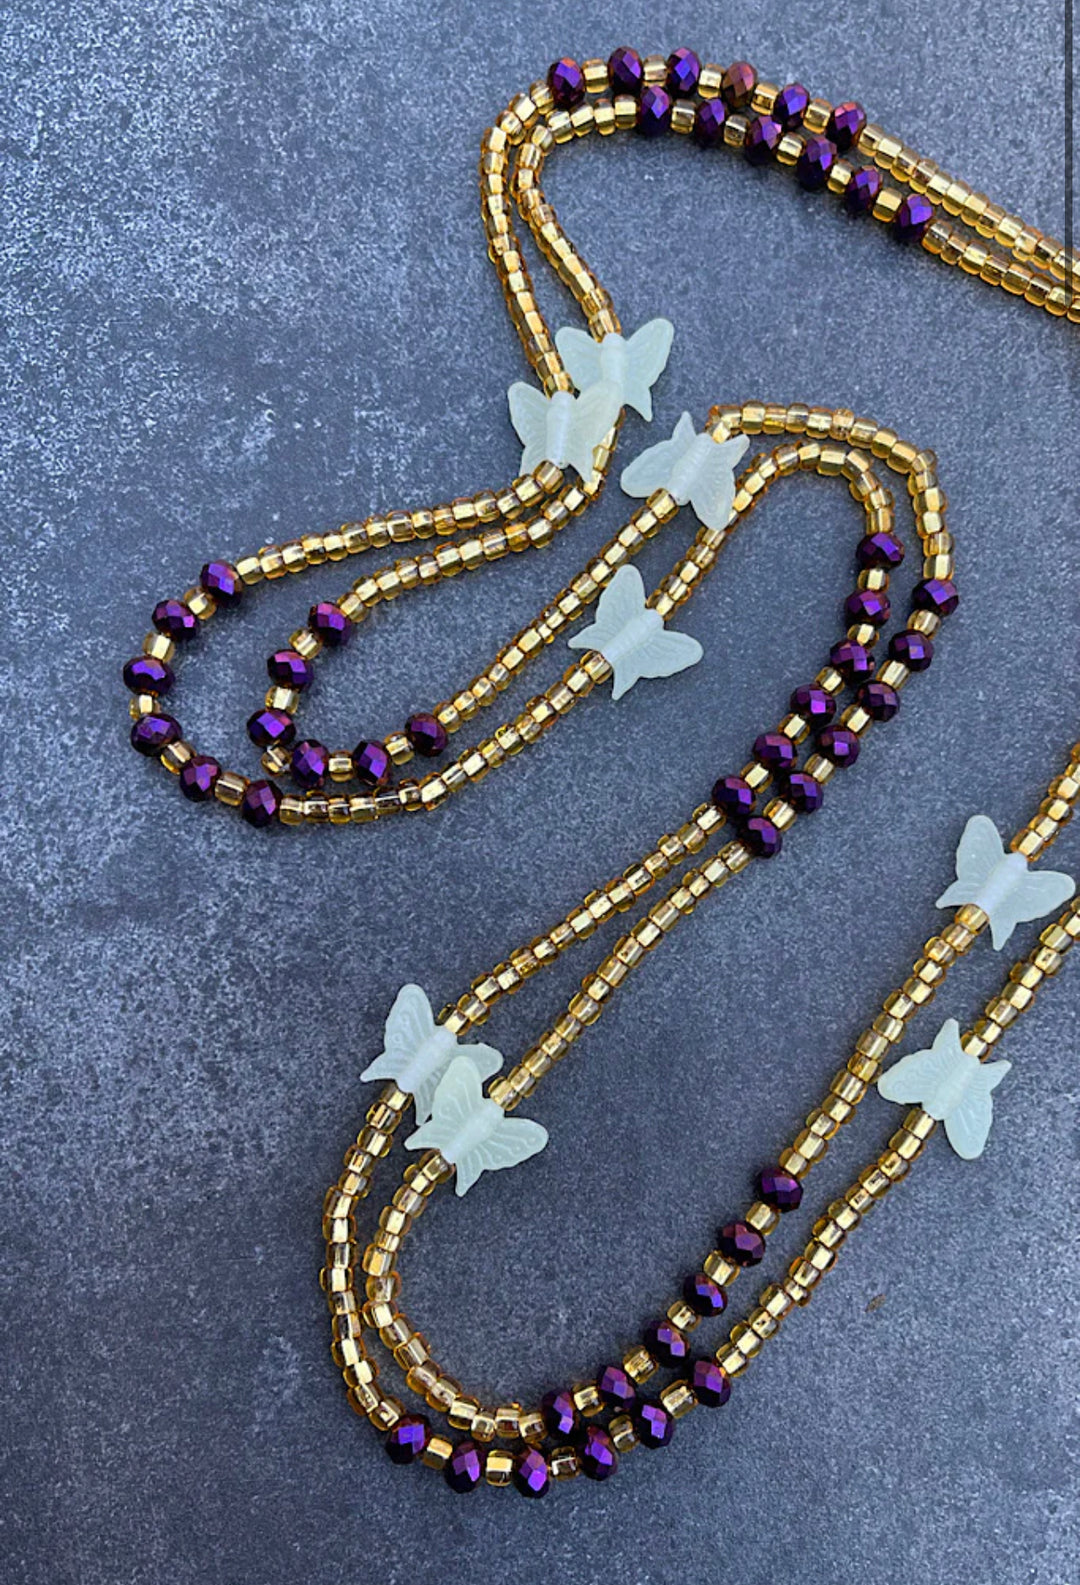 Gold and purple waist beads with glow in the dark butterfly 🦋